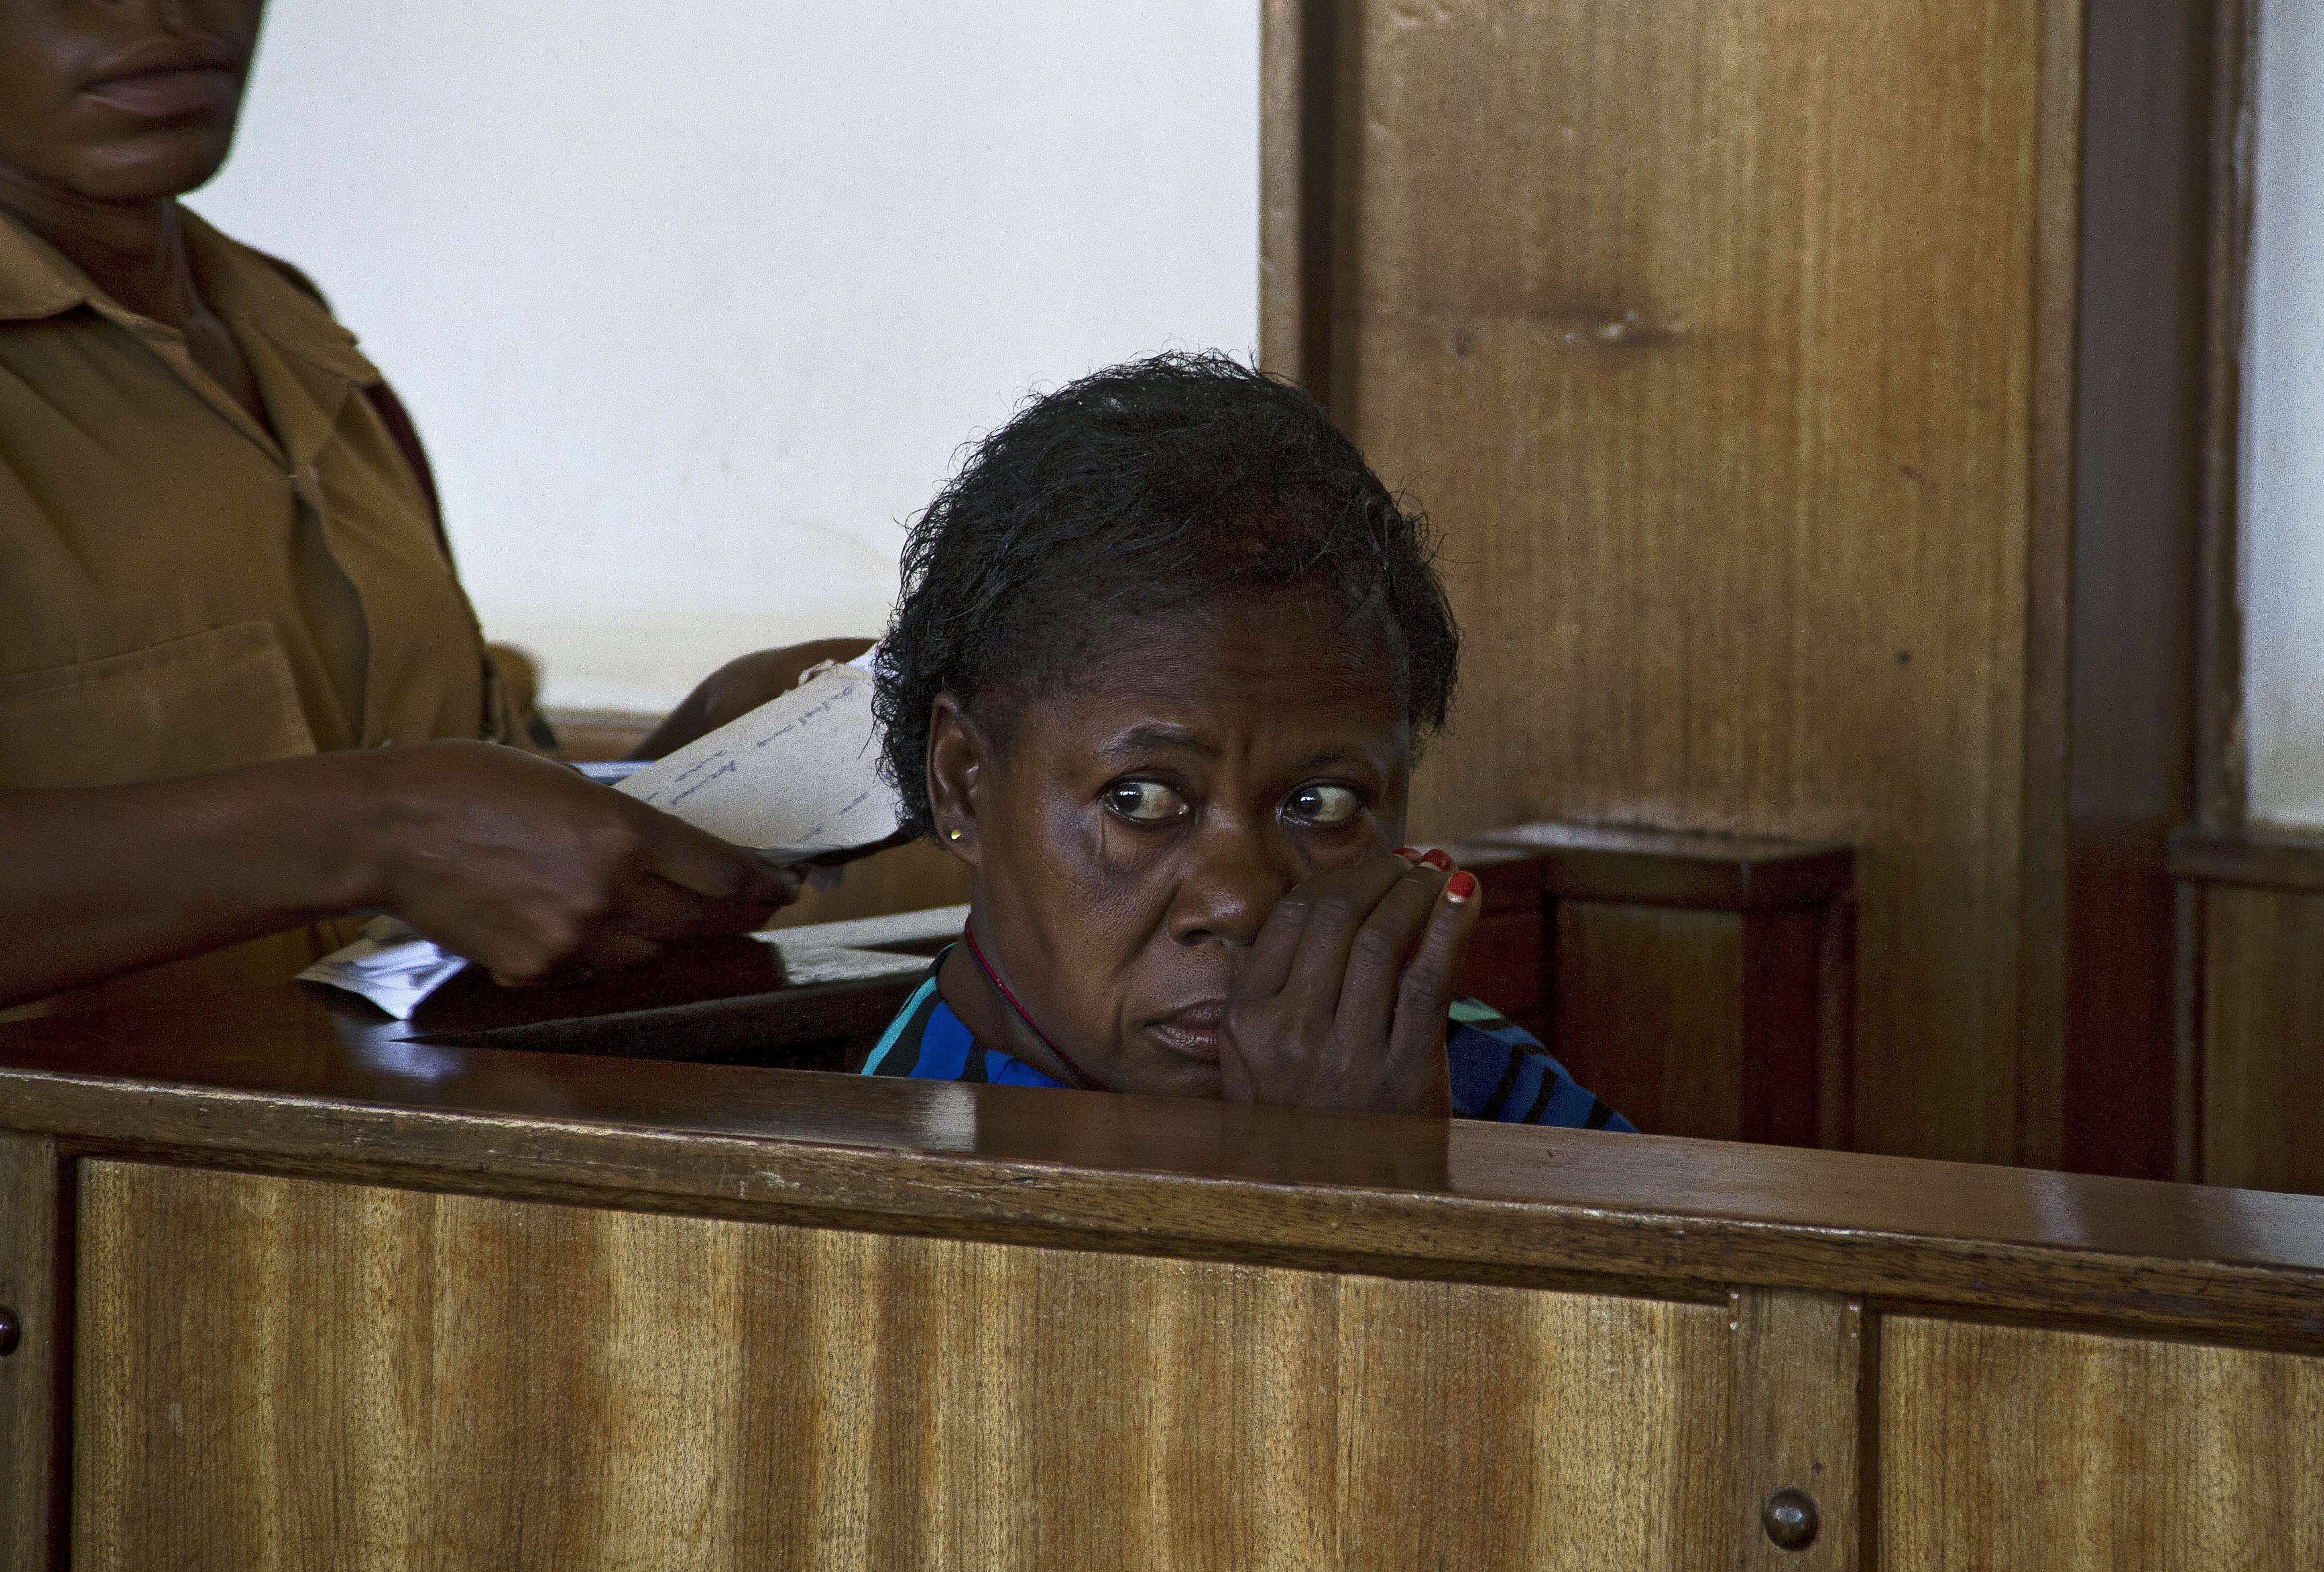 Ugandan nurse Rosemary Namubiru sits at the dock at the Buganda Road Magistrates Court on May 19, 2014 in Kampala during a ruling on a case where she was charged with "Criminal Negligence" and sentenced to 3 years in prison after she was found guilty by the Ugandan court.